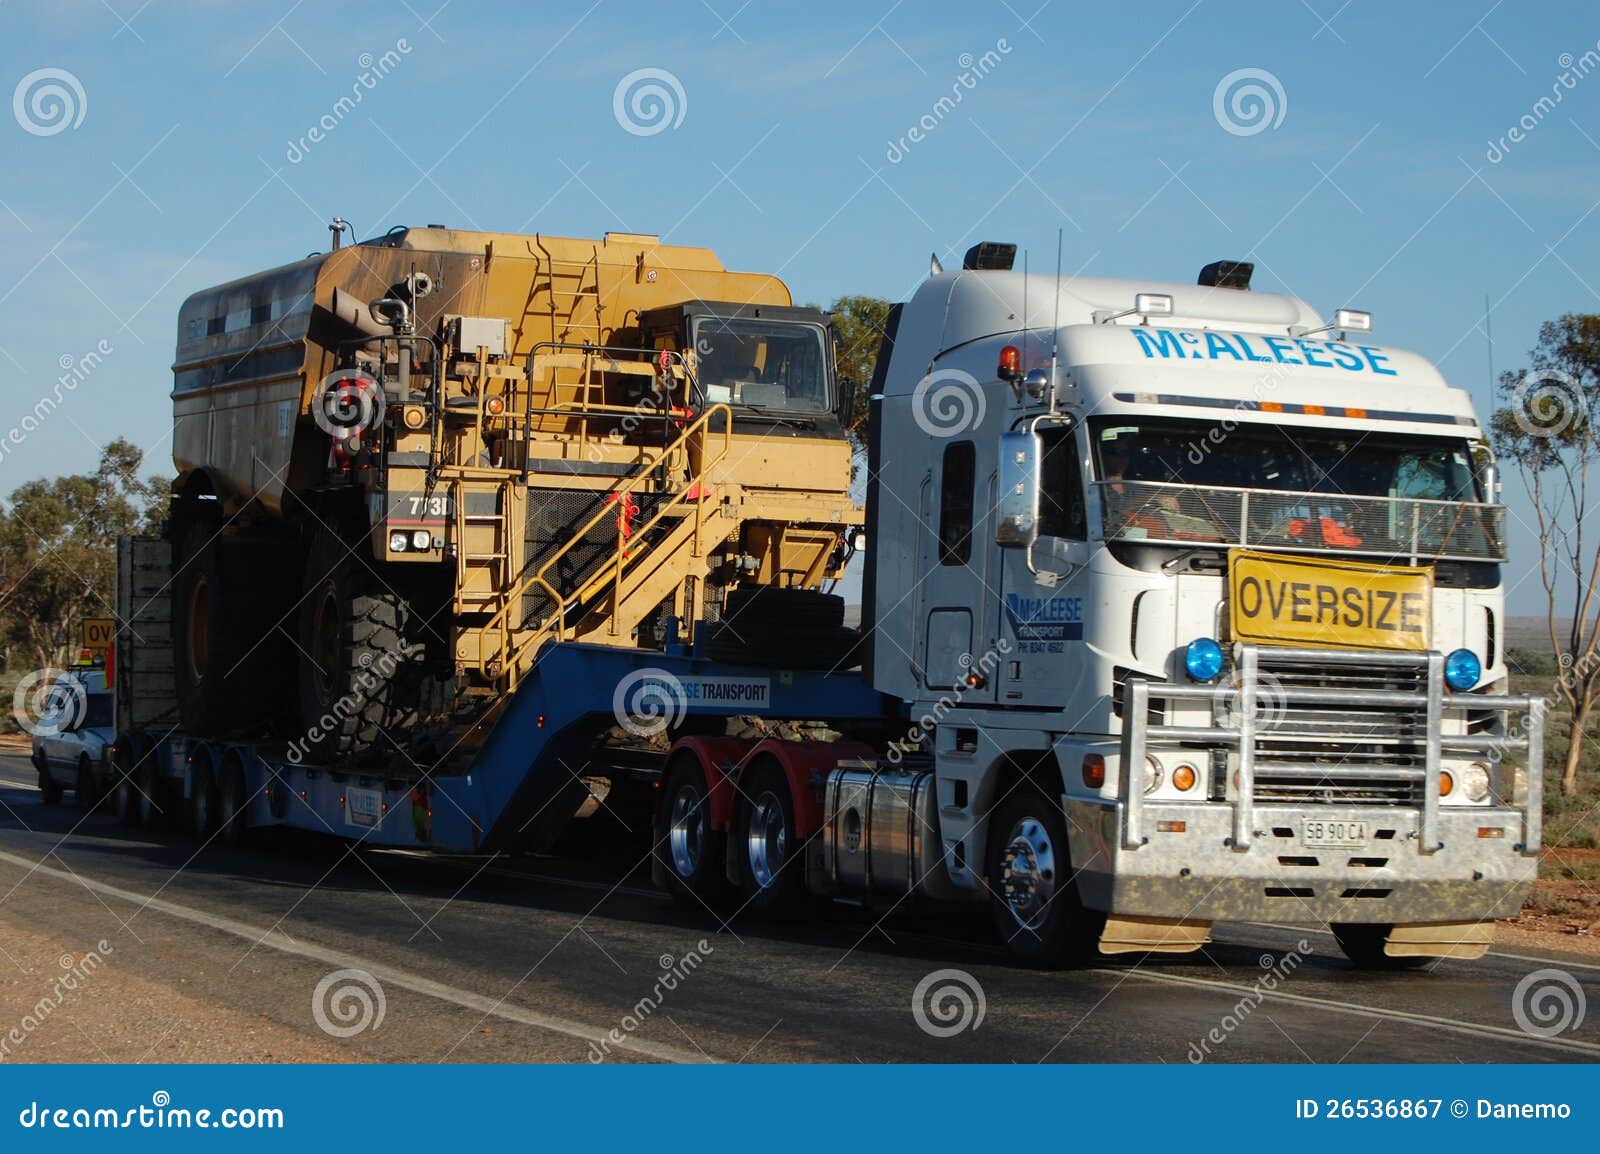 Oversize Truck In Australia Editorial Photography  Image: 26536867